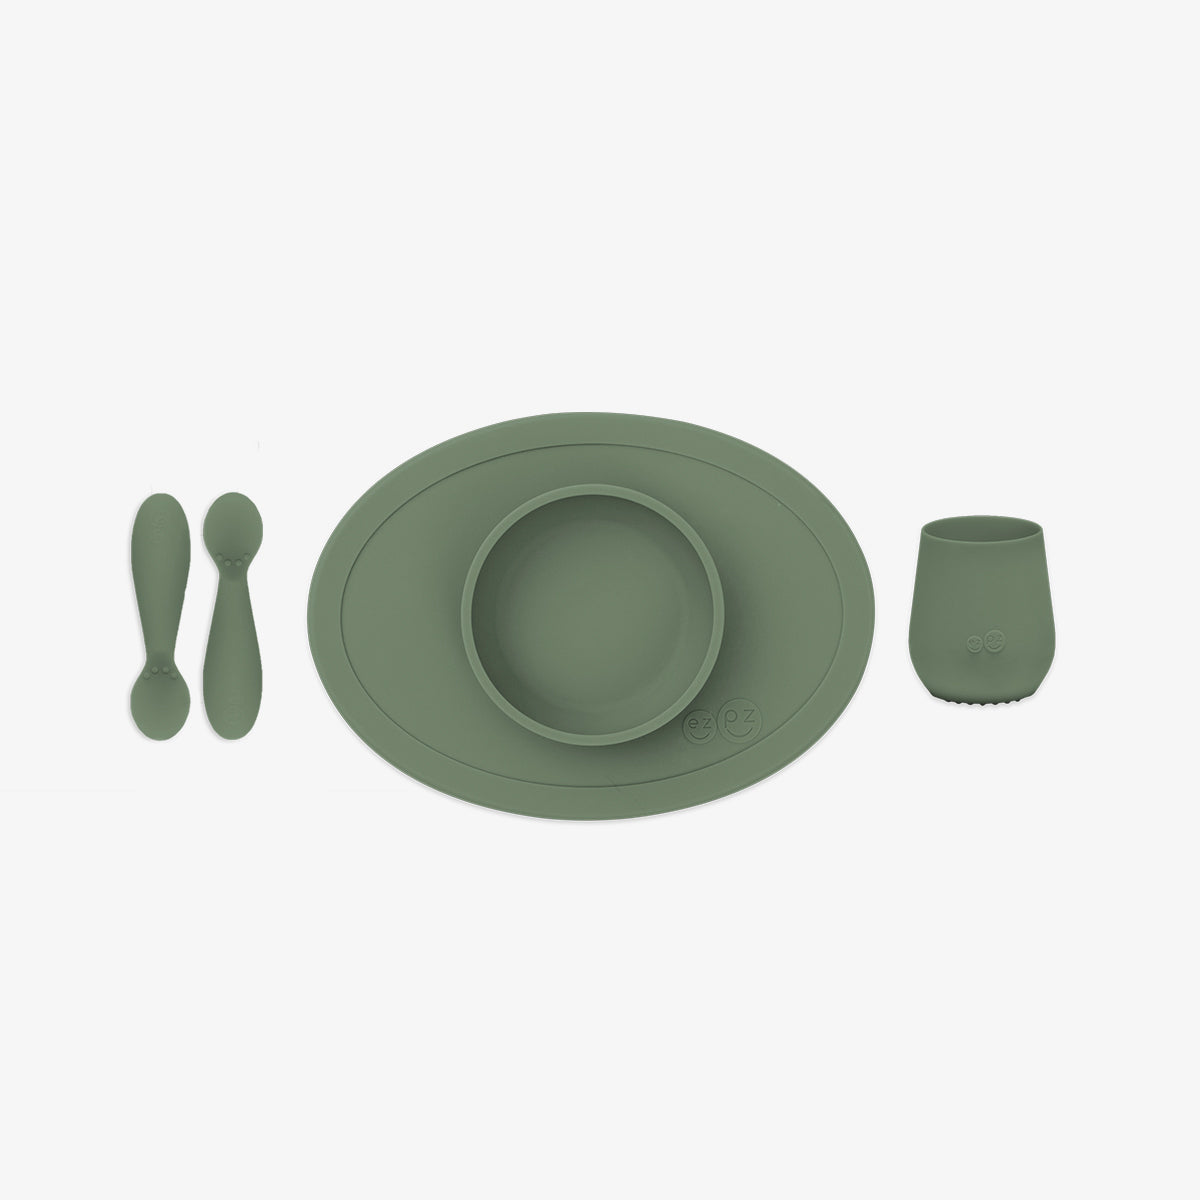 First Foods Set in Olive by ezpz / The Original All-In-One Silicone Plates & Placemats that Stick to the Table